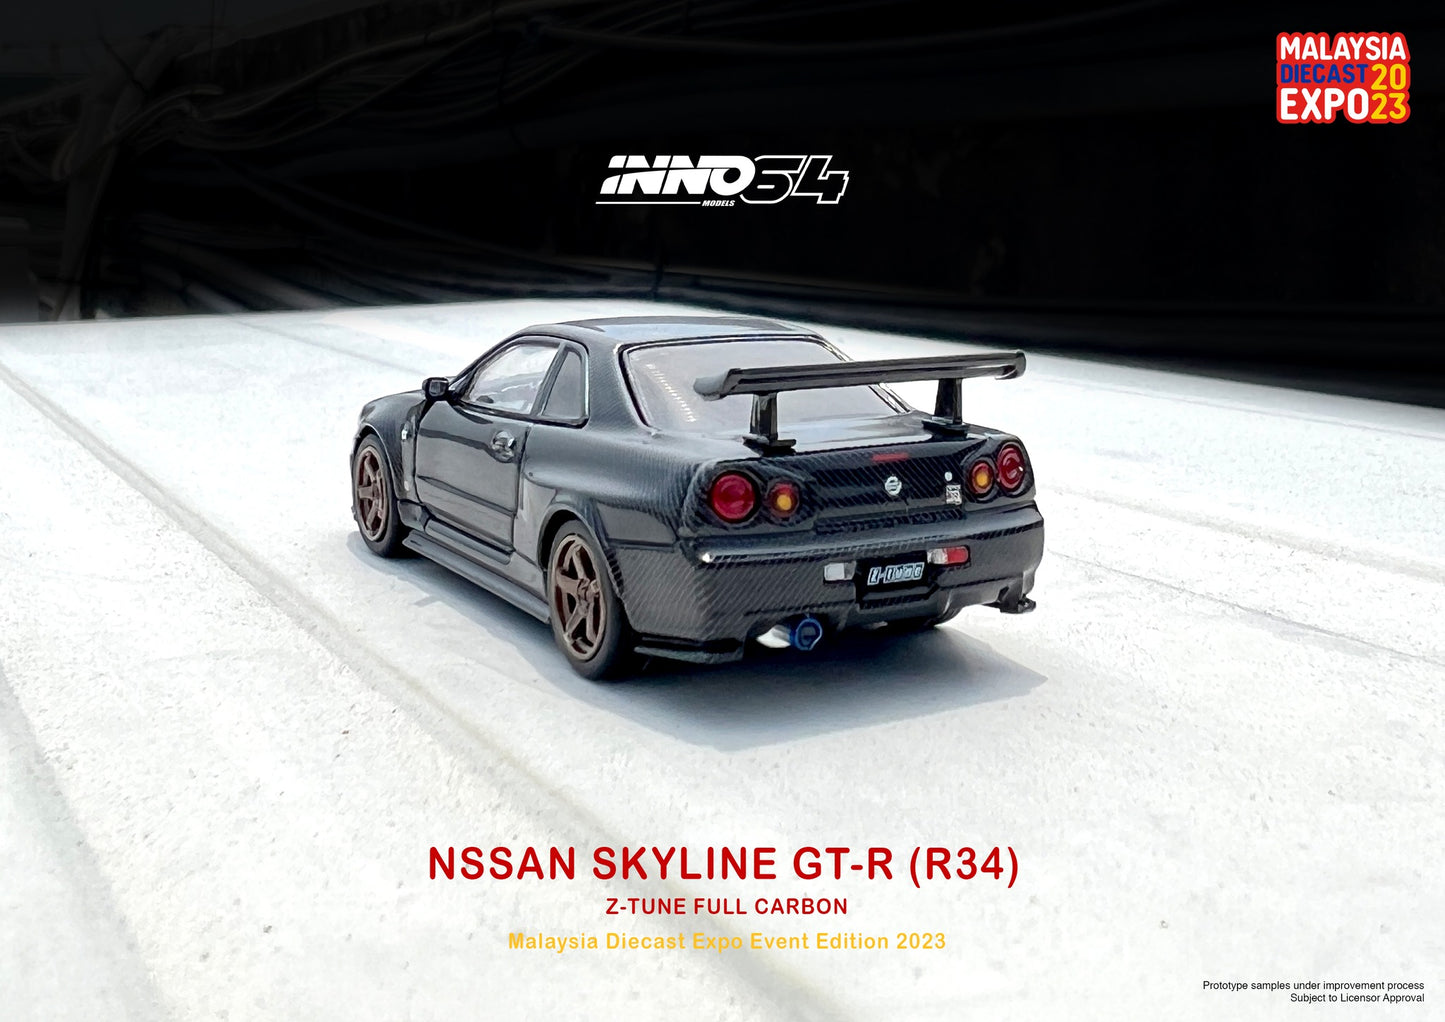 Inno64 Nissan Skyline GT-R (R34) Z-Tune in Full Carbon - Malaysia Diecast Expo 2023